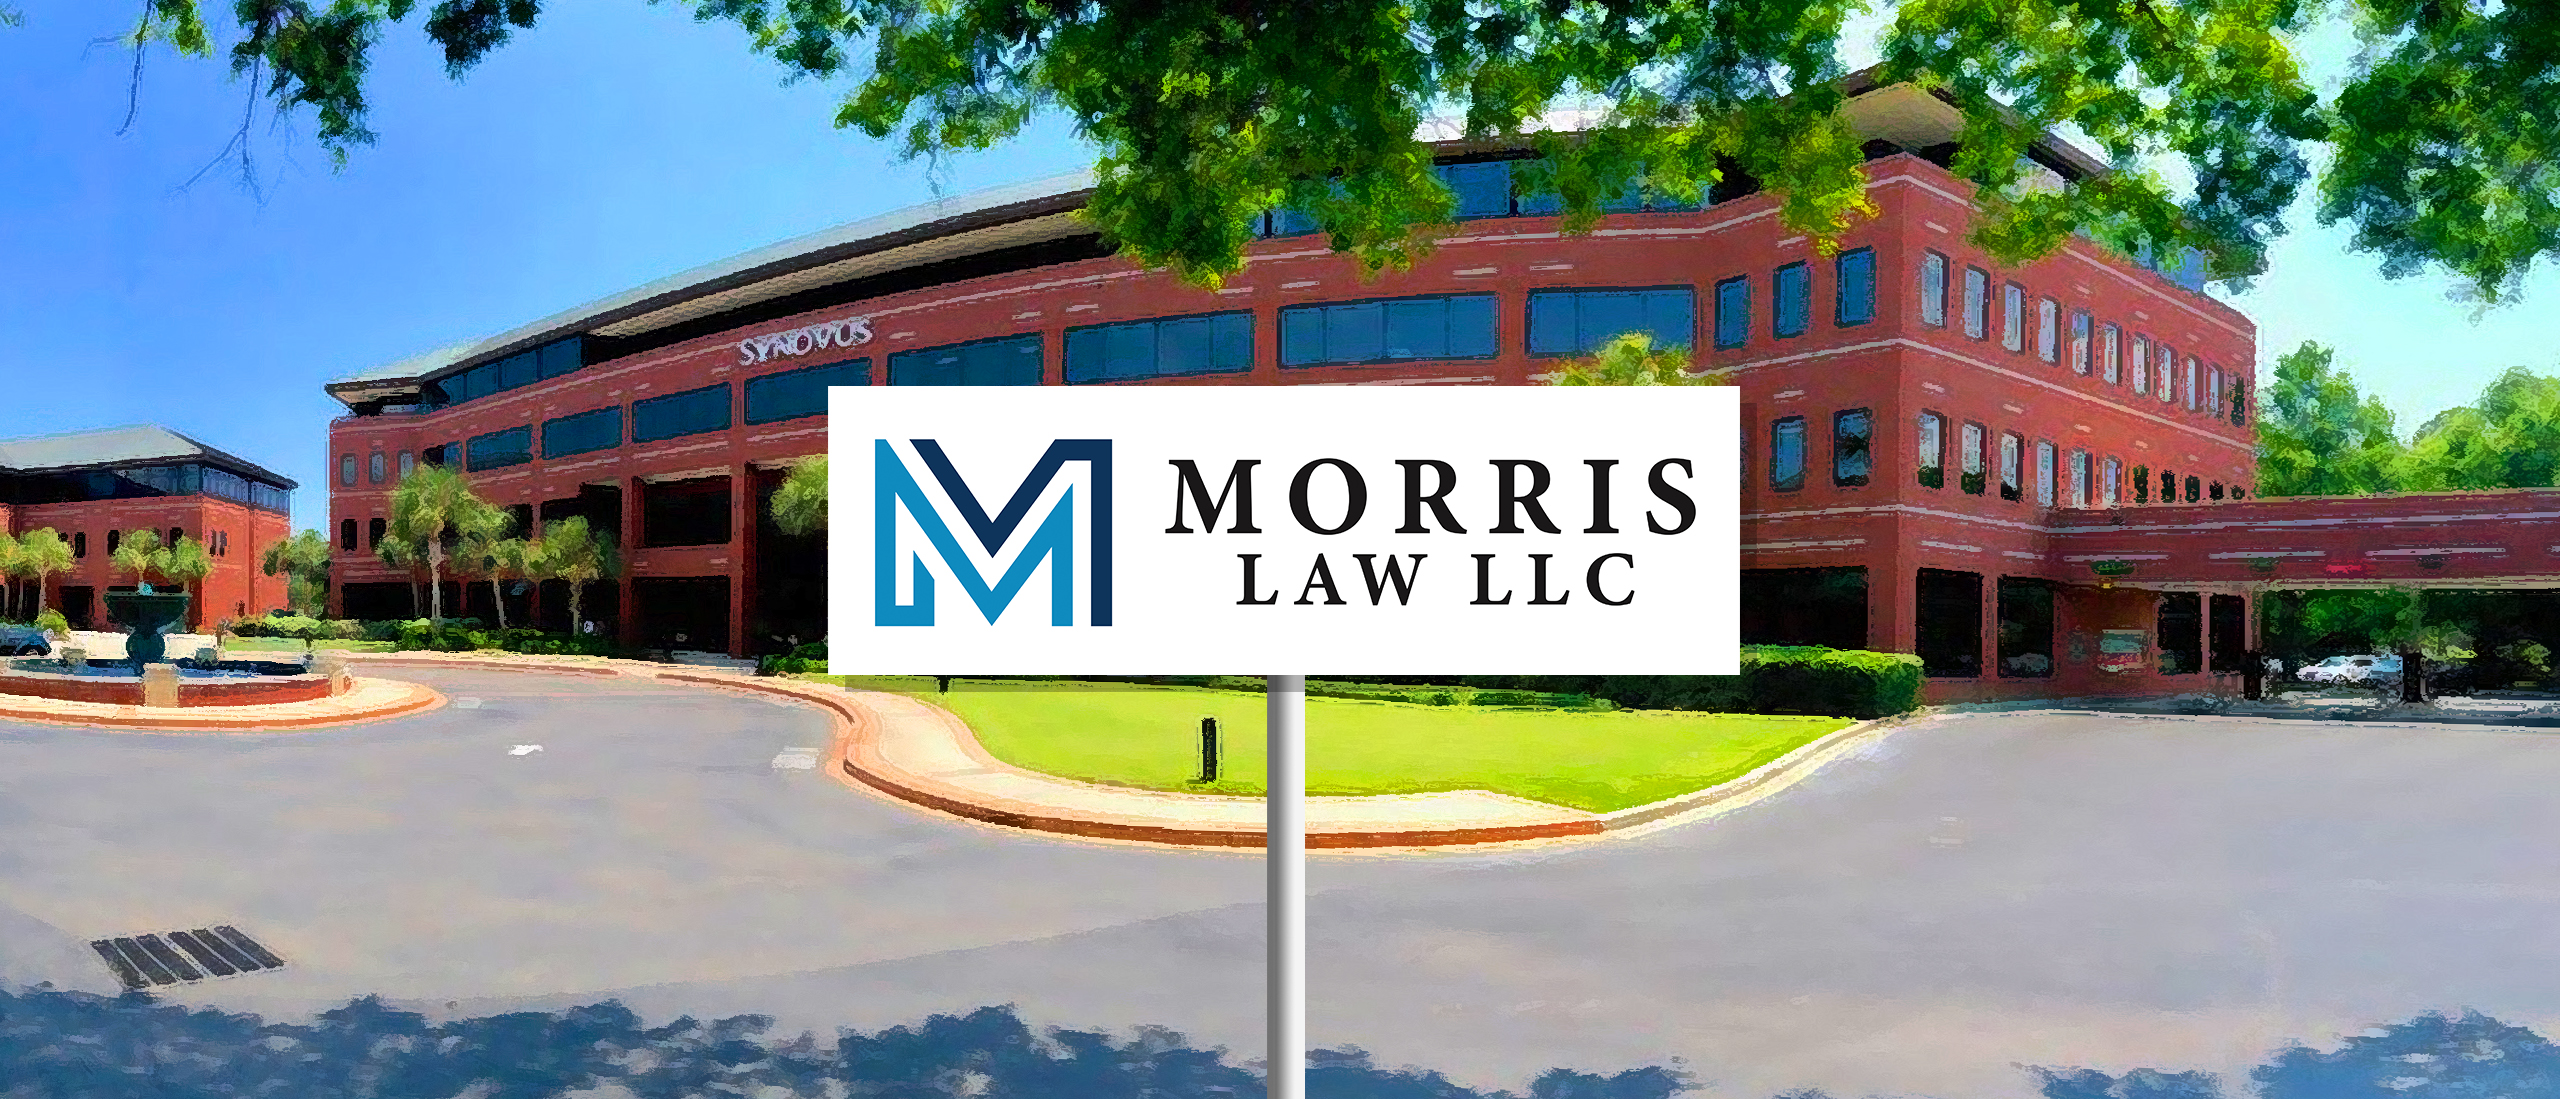 Morris Law Accident Injury Lawyers New Location in Myrtle Beach.